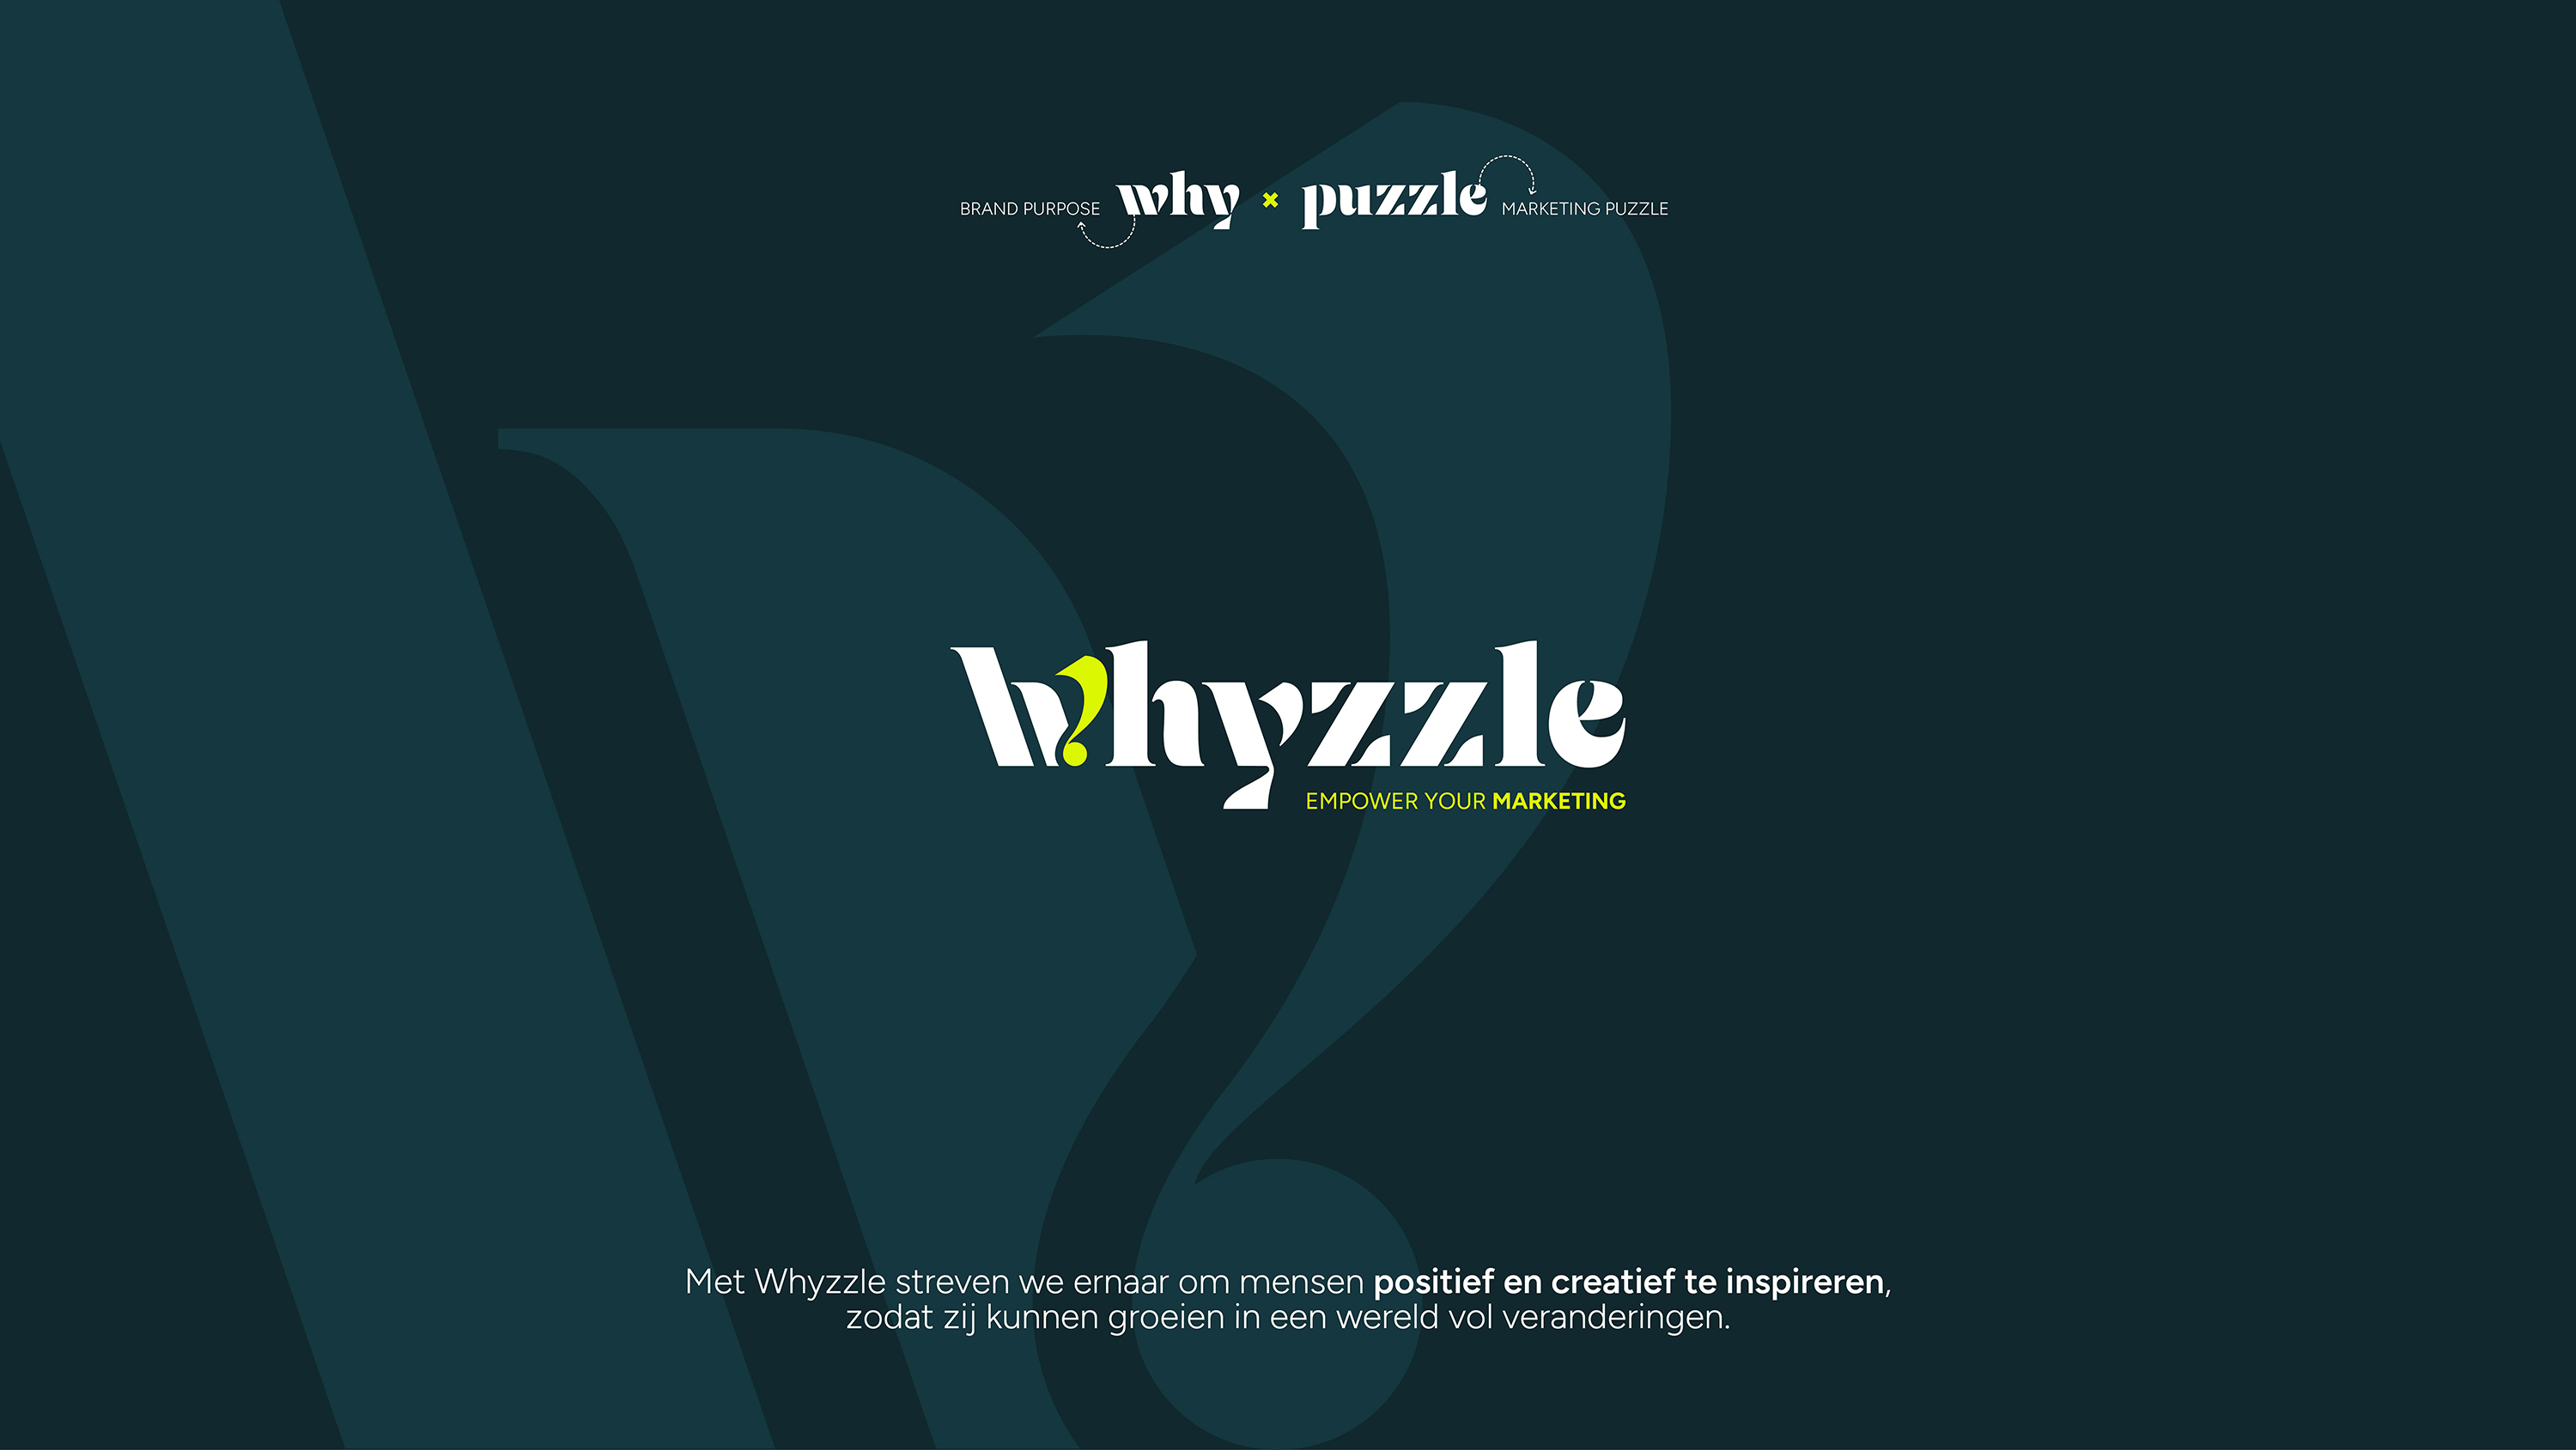 Whyzzle, why puzzle